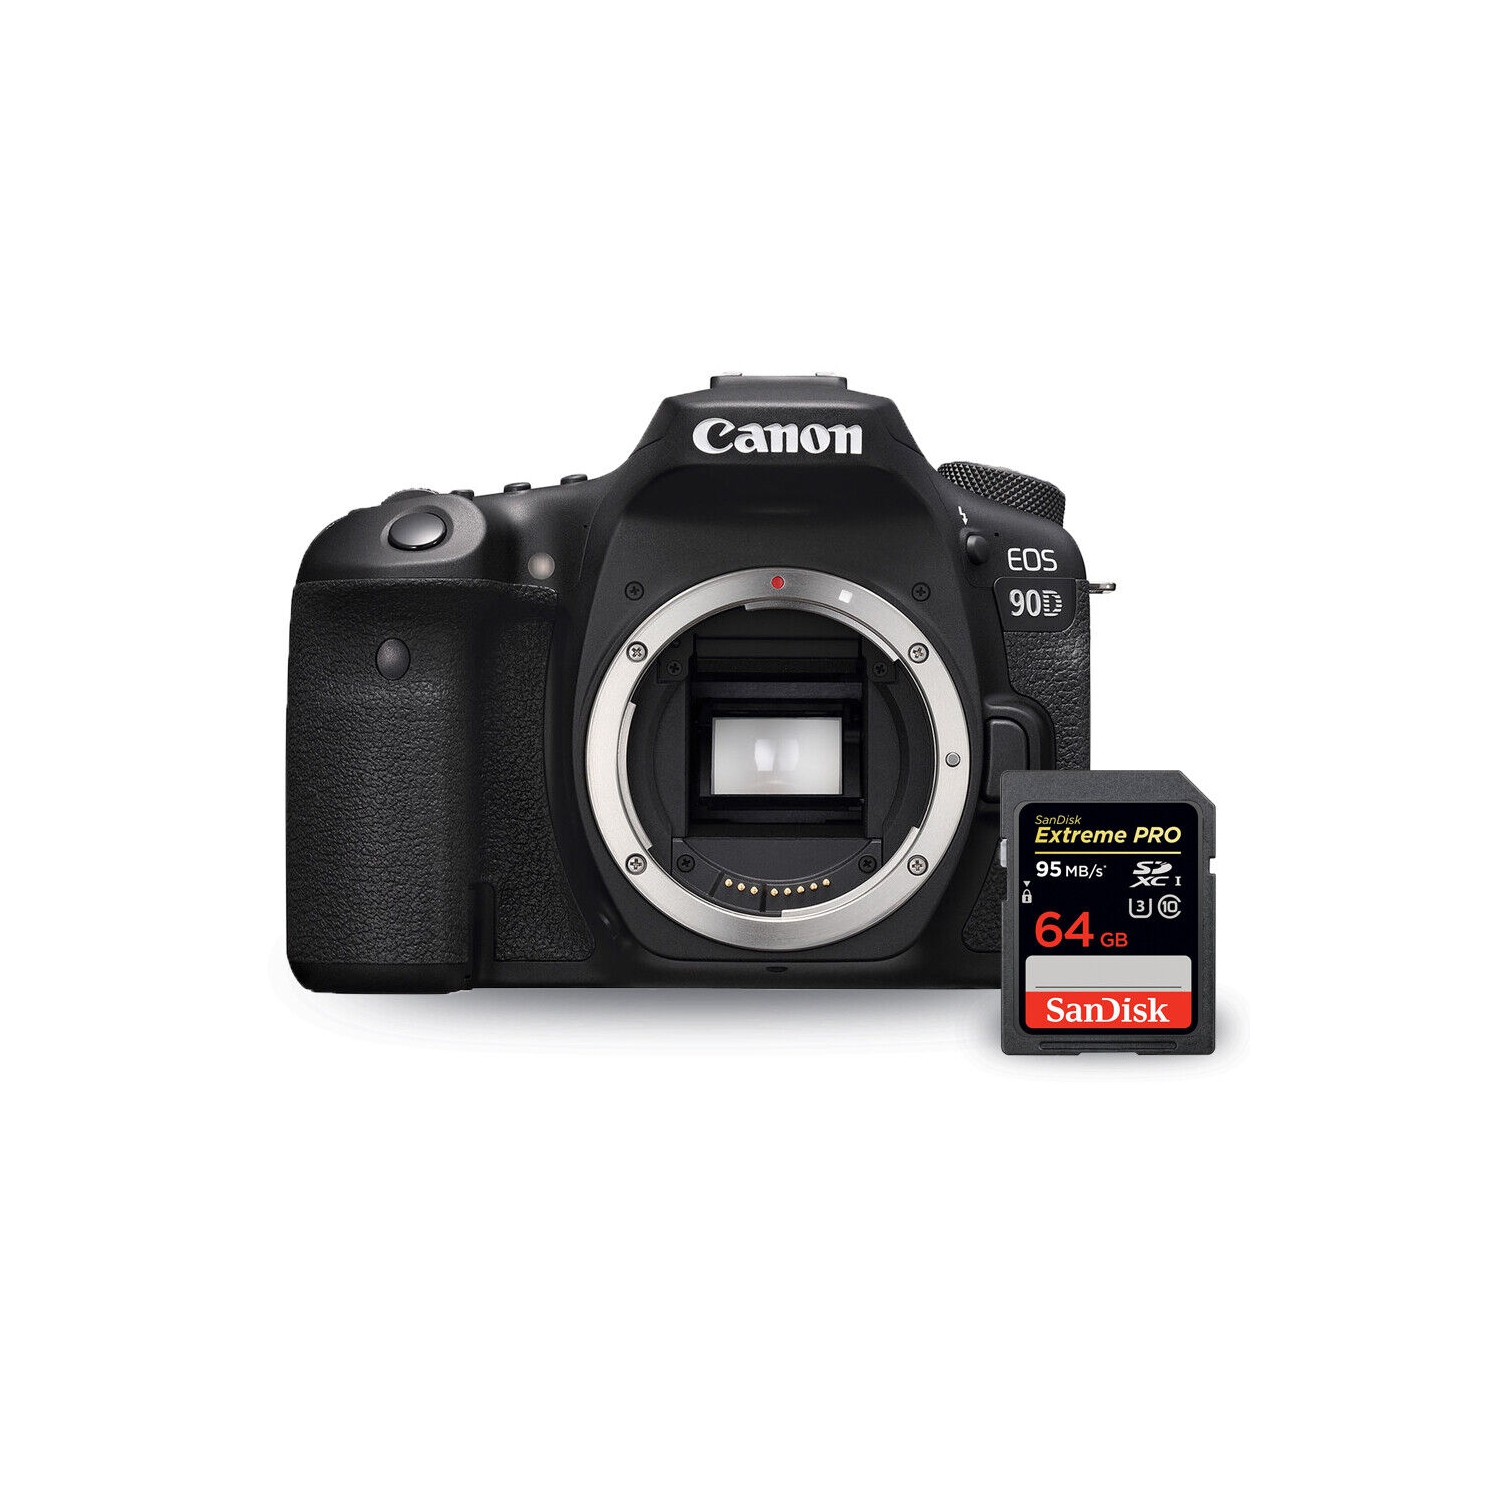 Canon EOS 90D DSLR Camera (Body Only) 3616C002 + Sandisk Extreme Pro 64GB SD